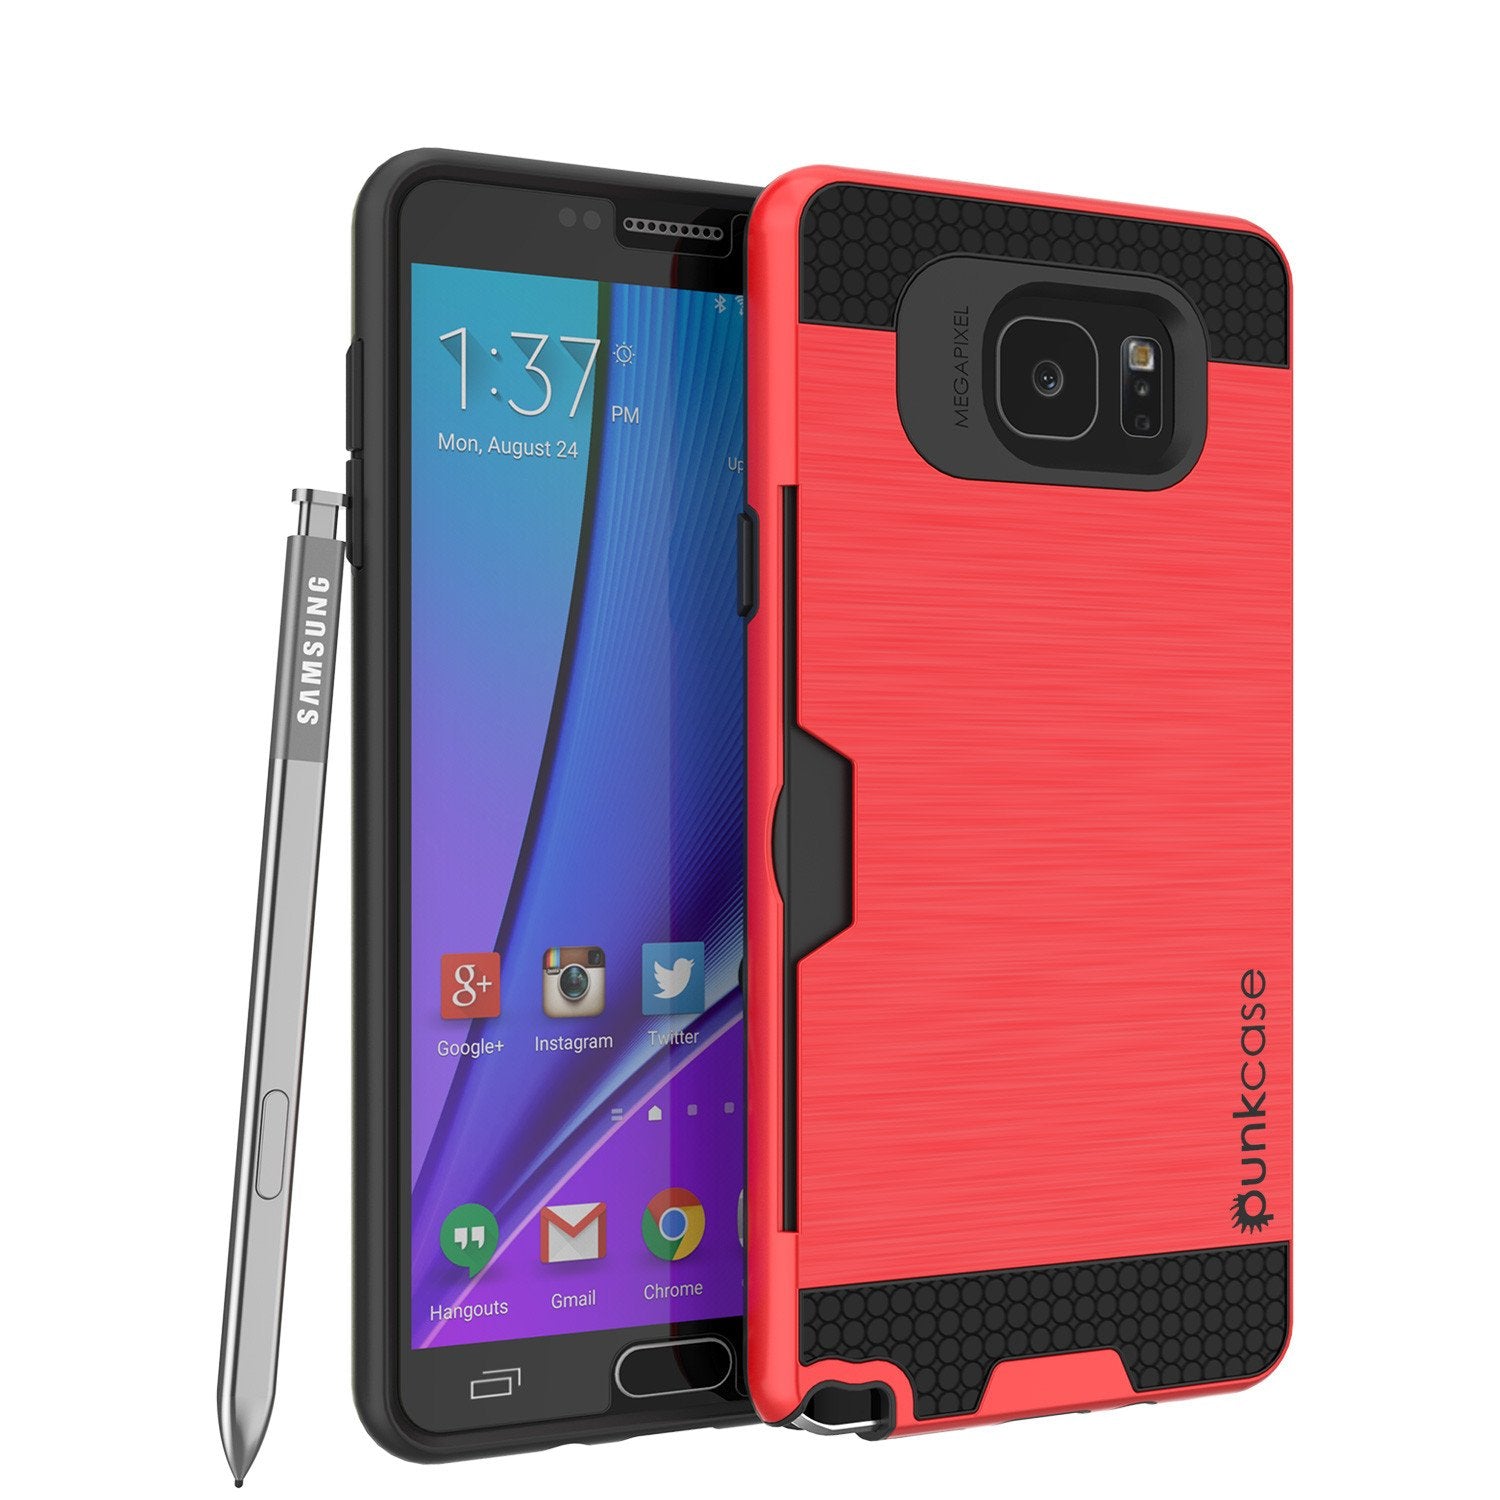 Galaxy Note 5 Case PunkCase SLOT Red Series Slim Armor Soft Cover Case w/ Tempered Glass